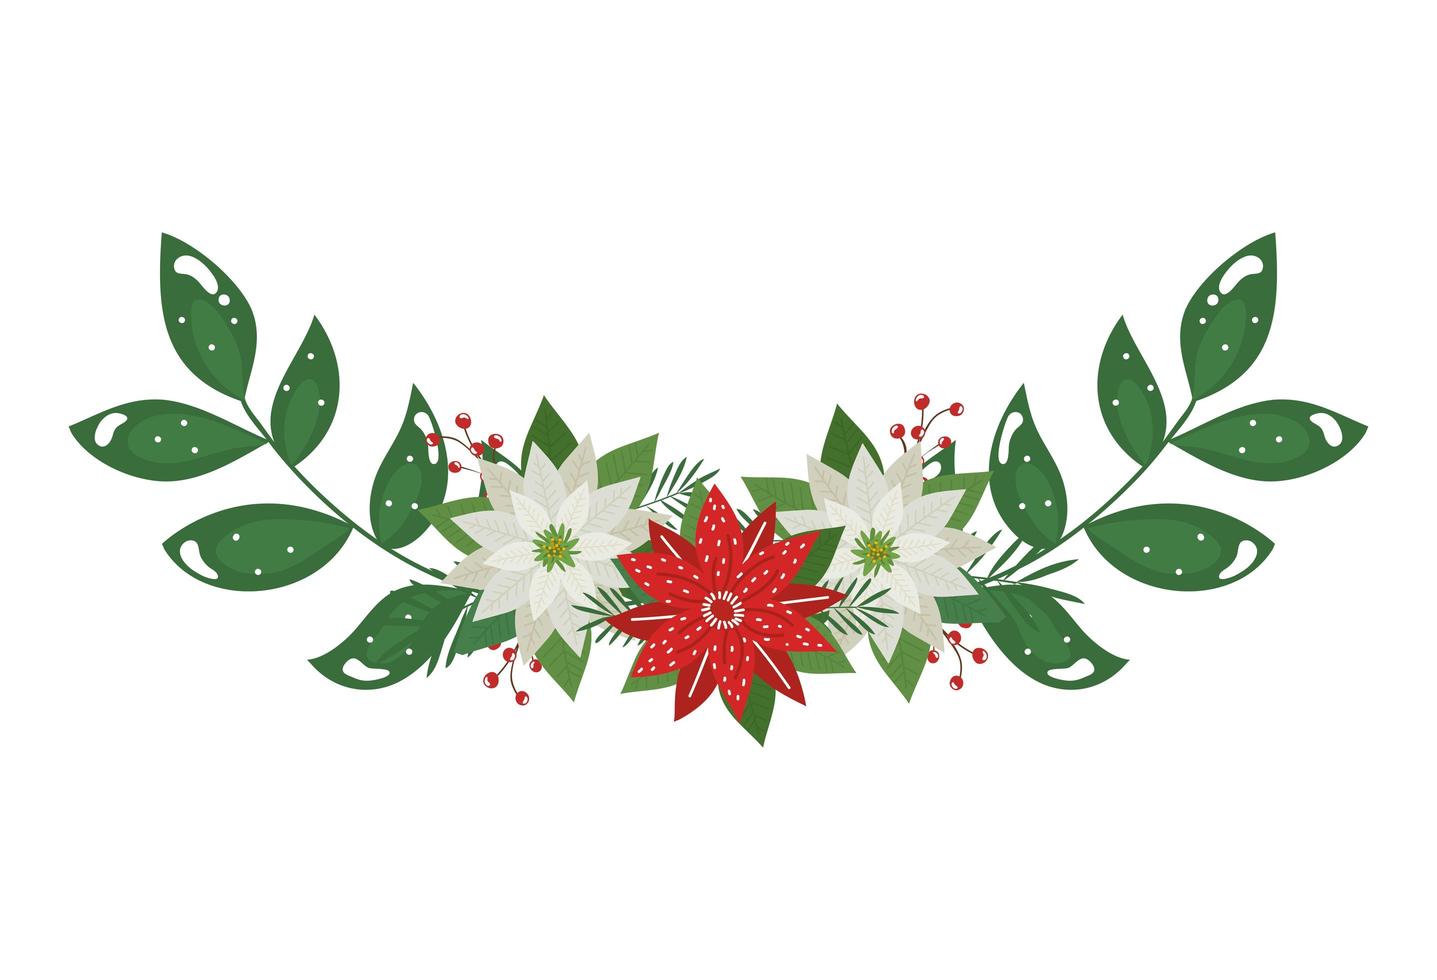 flowers christmas decorative with branches and leafs vector